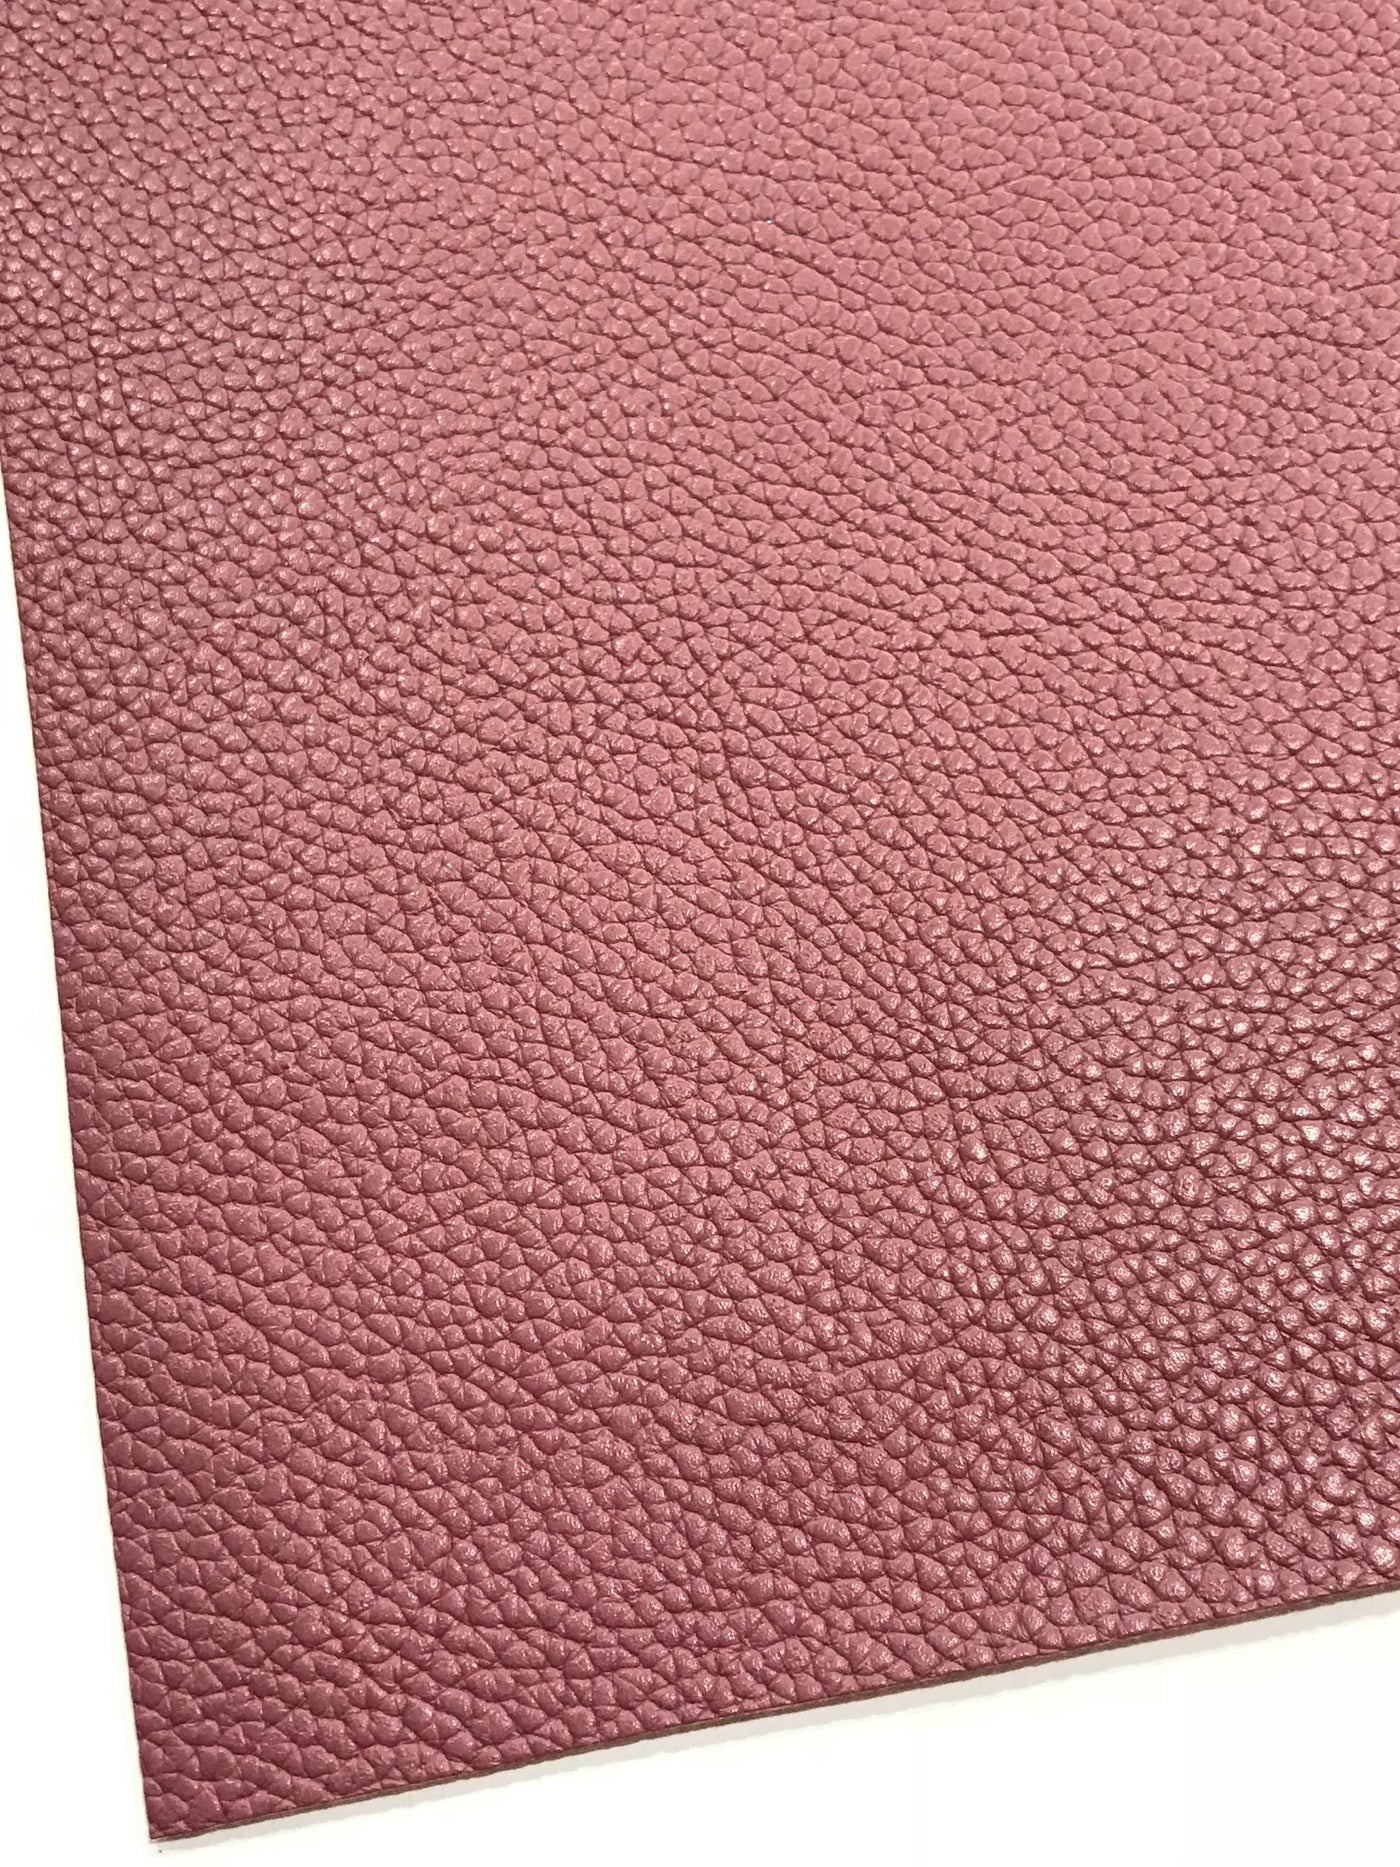 Rosewood Leatherette Sheet Thick 1.1mm